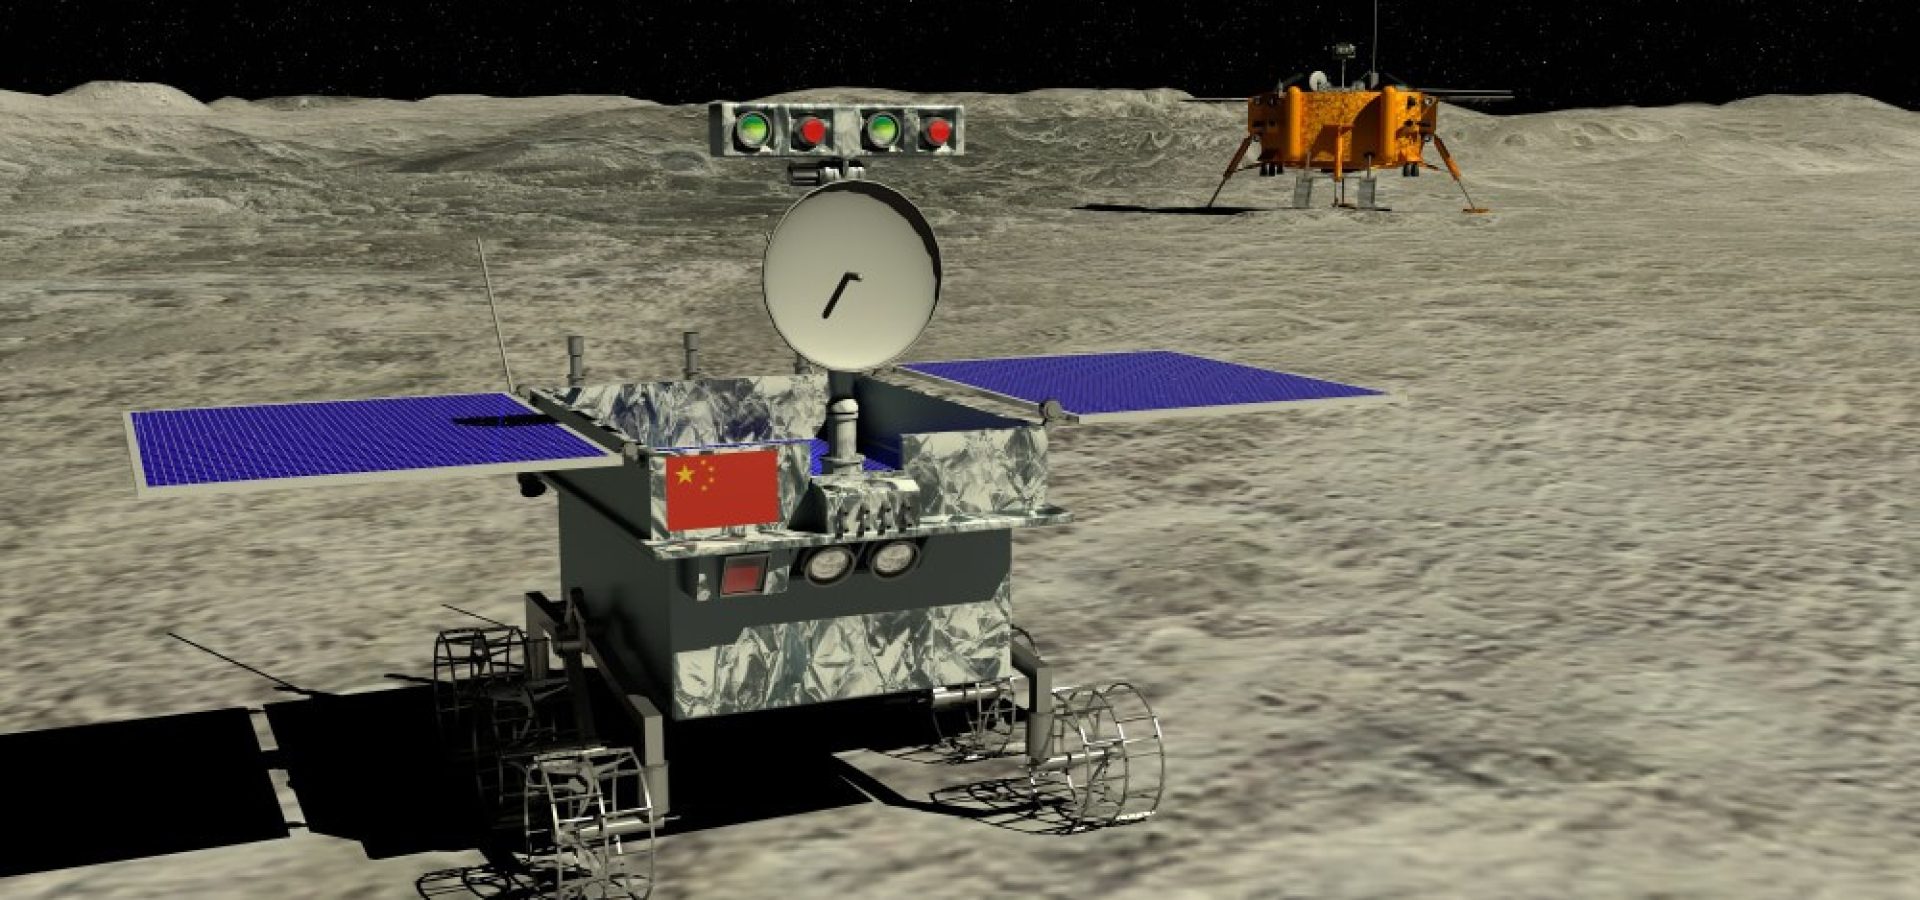 Lunar rover Yutu 2 rolling across the surface of moon